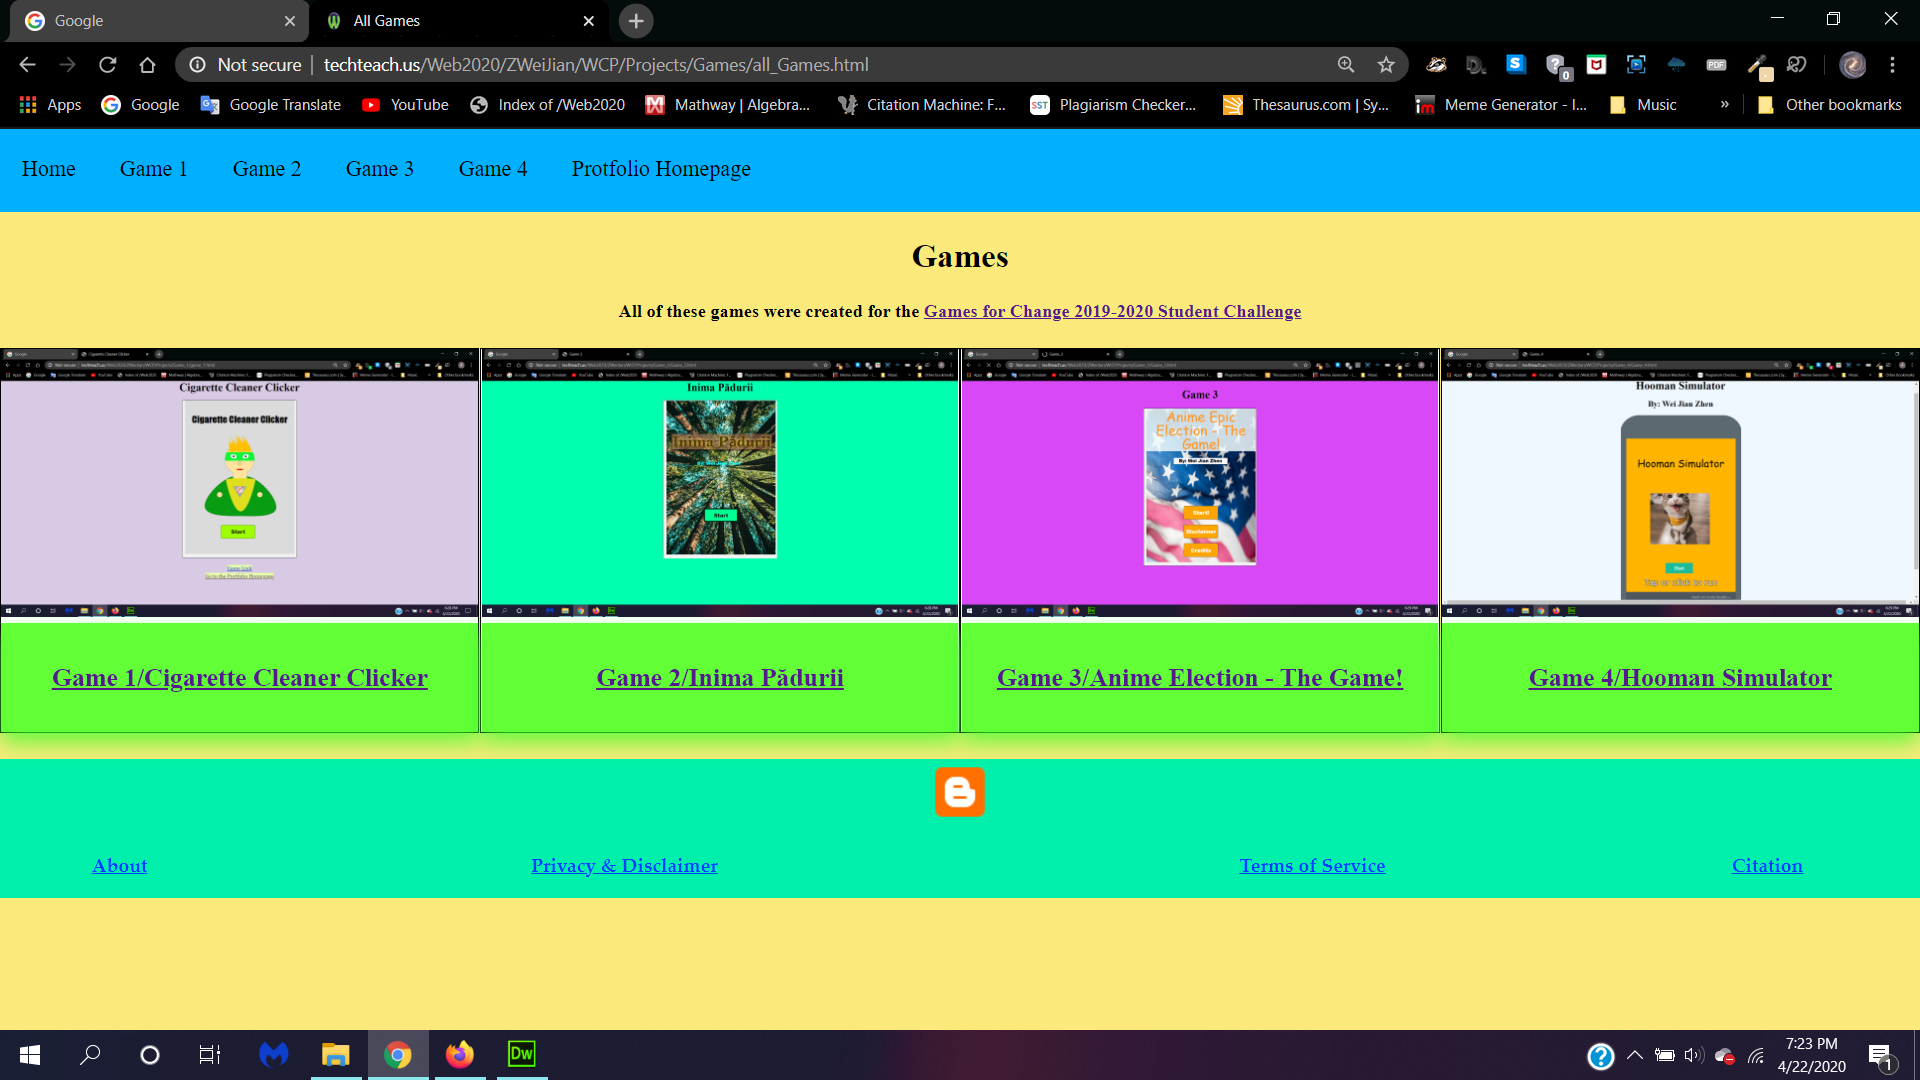 A screenshot of the Games for Change Student Challenge 2019-2020 Game Homepage that links to 4 playable games